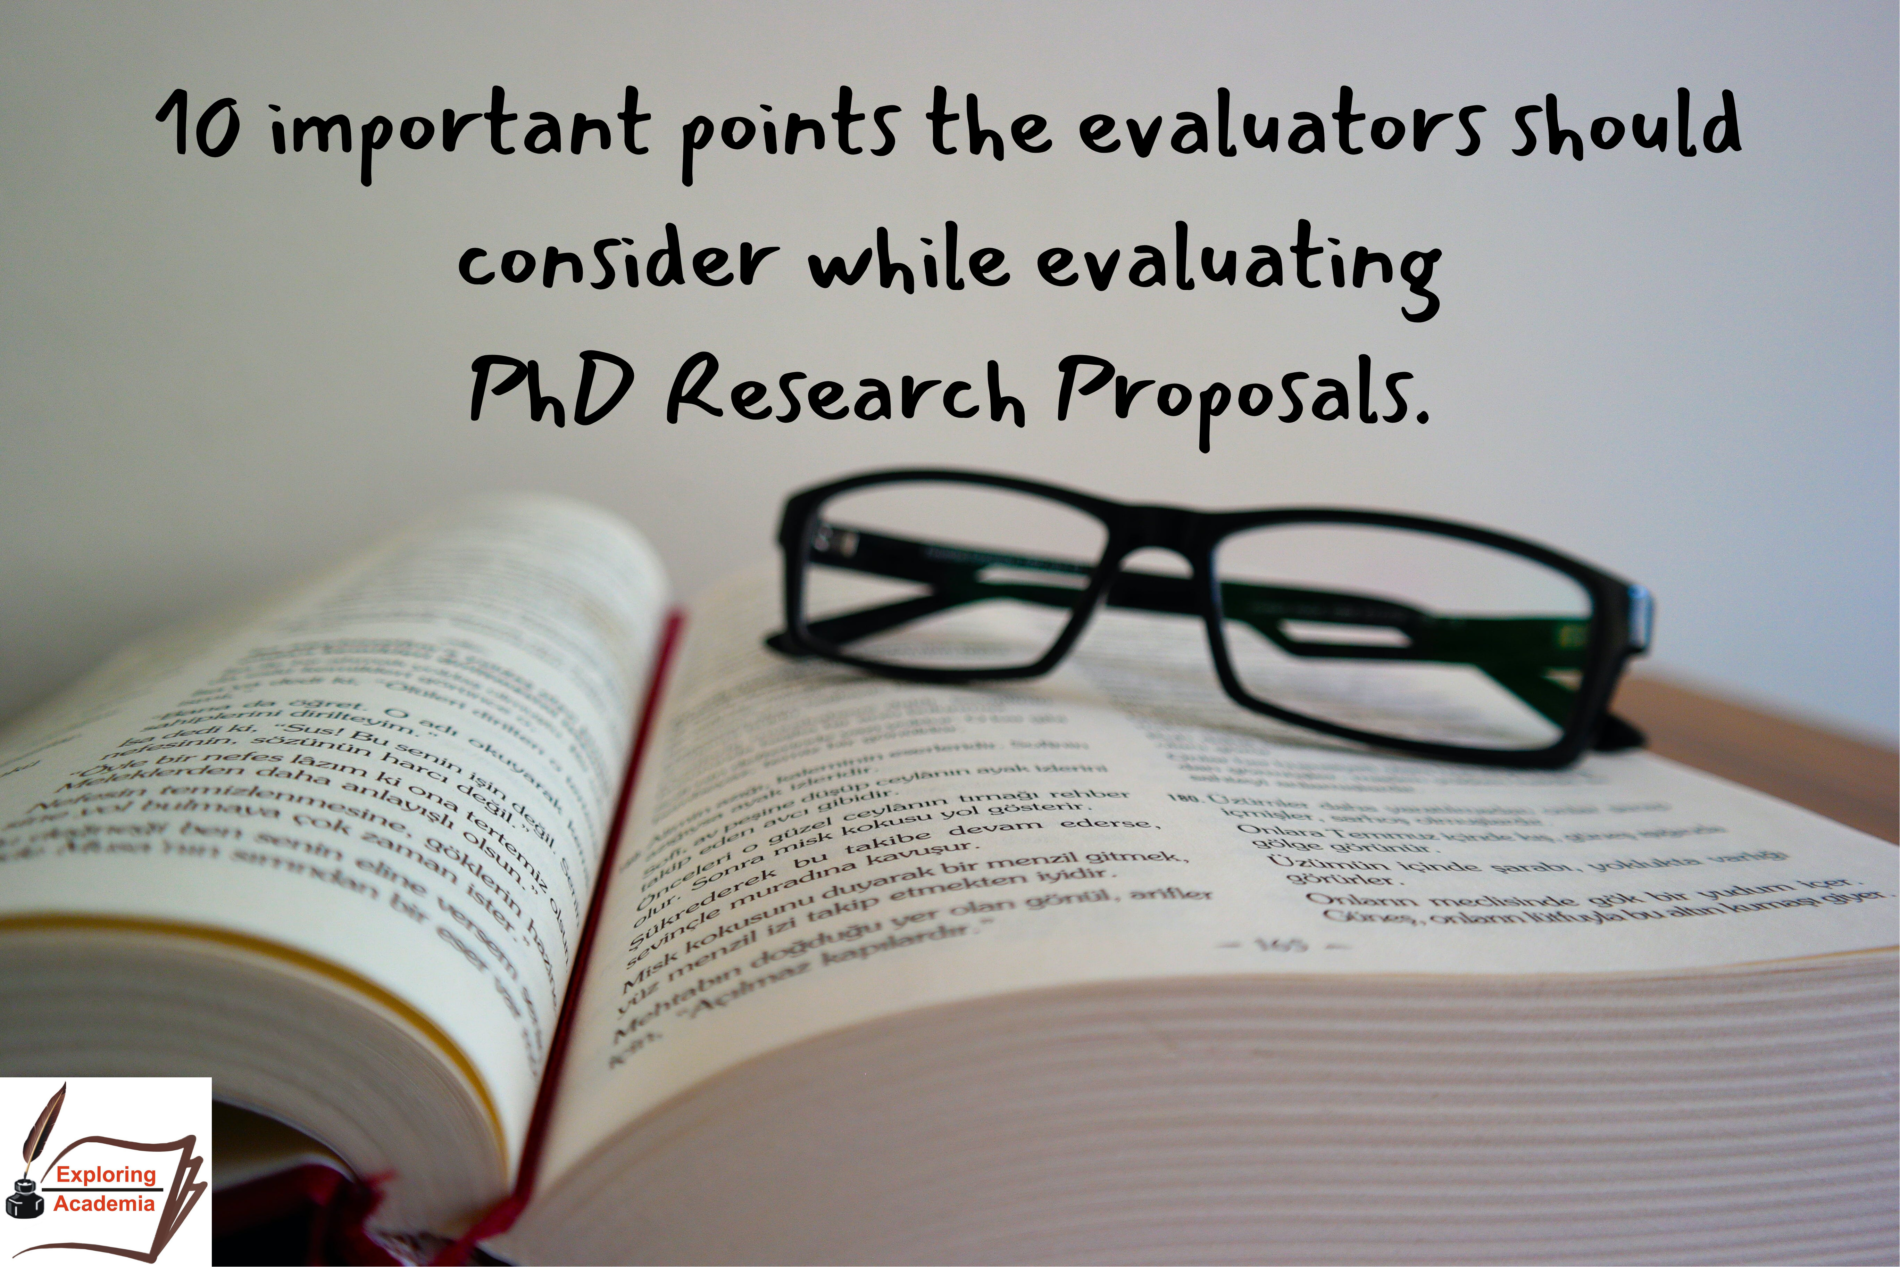 10 important points the evaluators should consider while evaluating PhD Research Proposals.